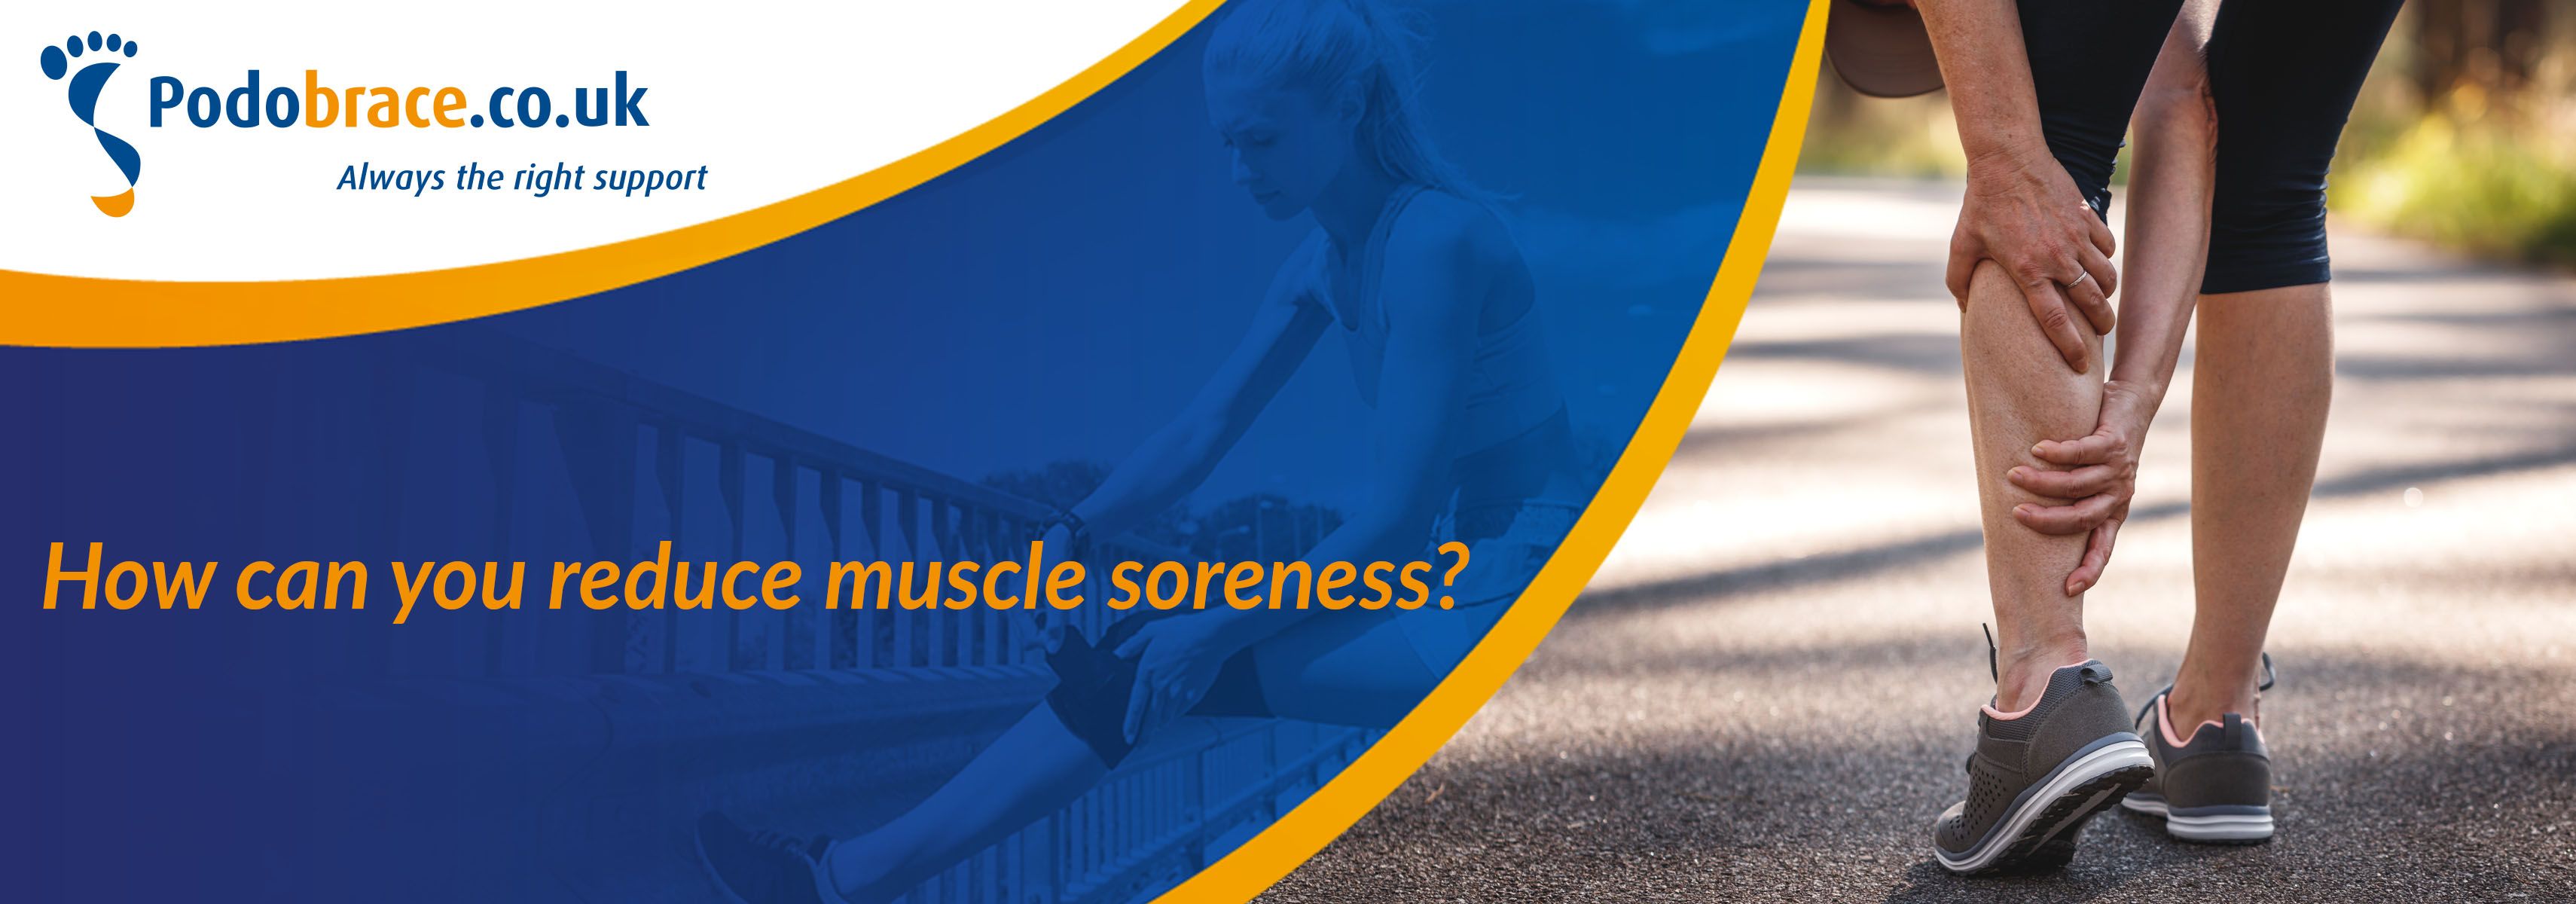 How can you reduce muscle soreness